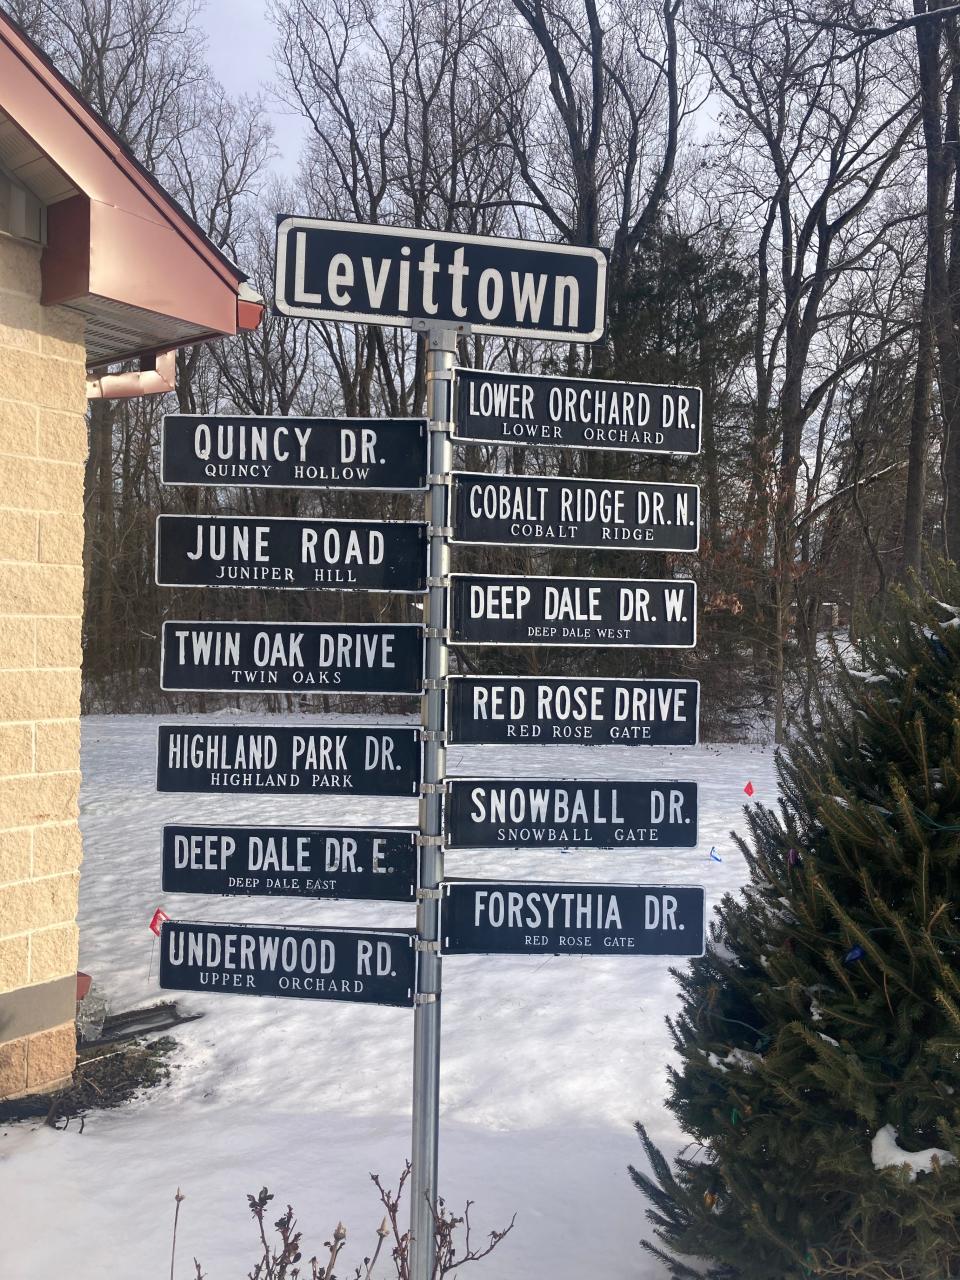 A collection of 1950s aluminum street signs from Levittown's early days, on display at an undisclosed location.